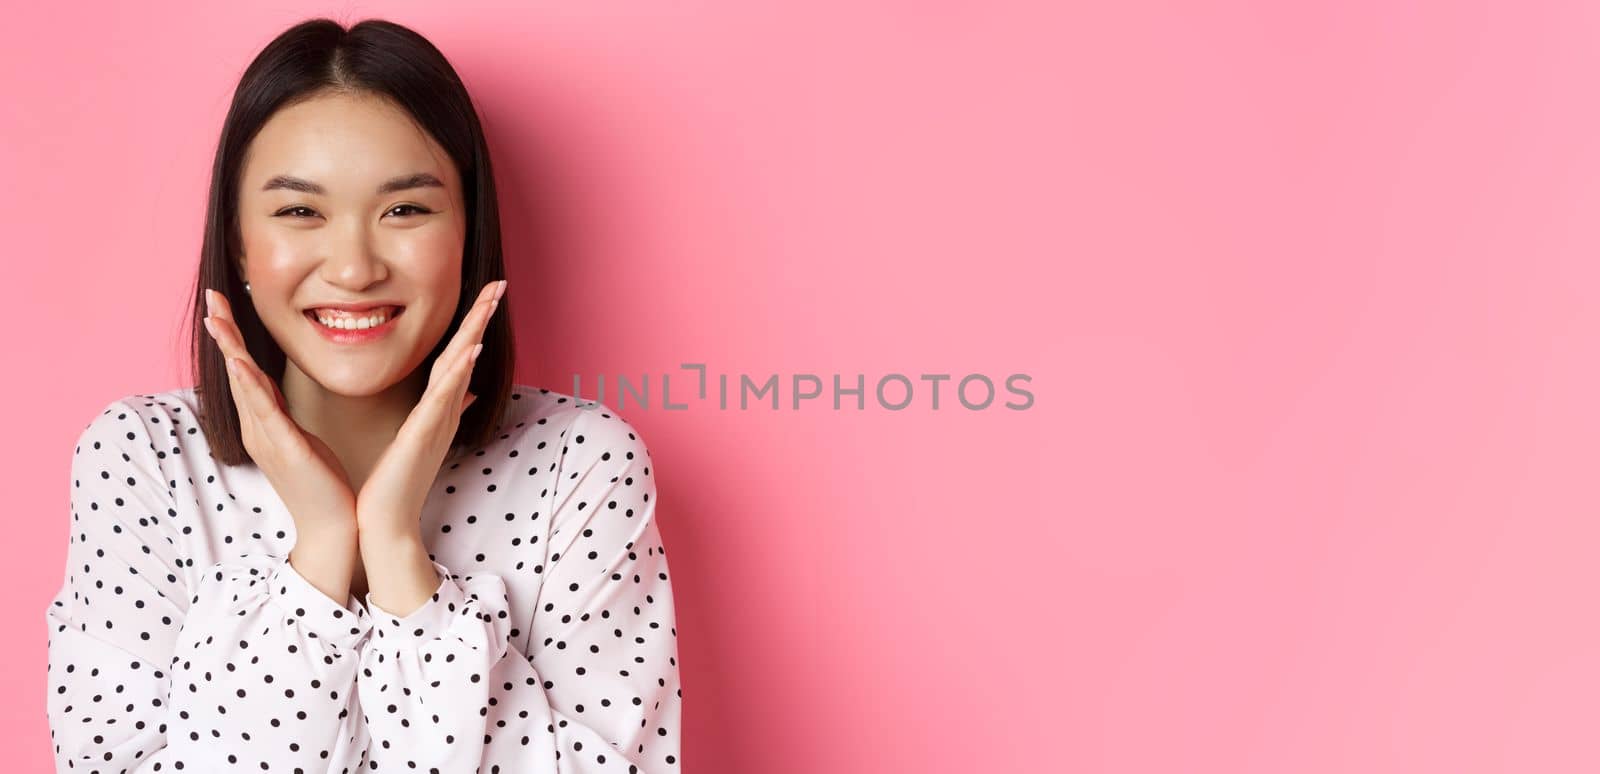 Beauty and skin care concept. Close-up of cute asian woman showing clean perfect face and smiling, looking happy at camera, standing over pink background.